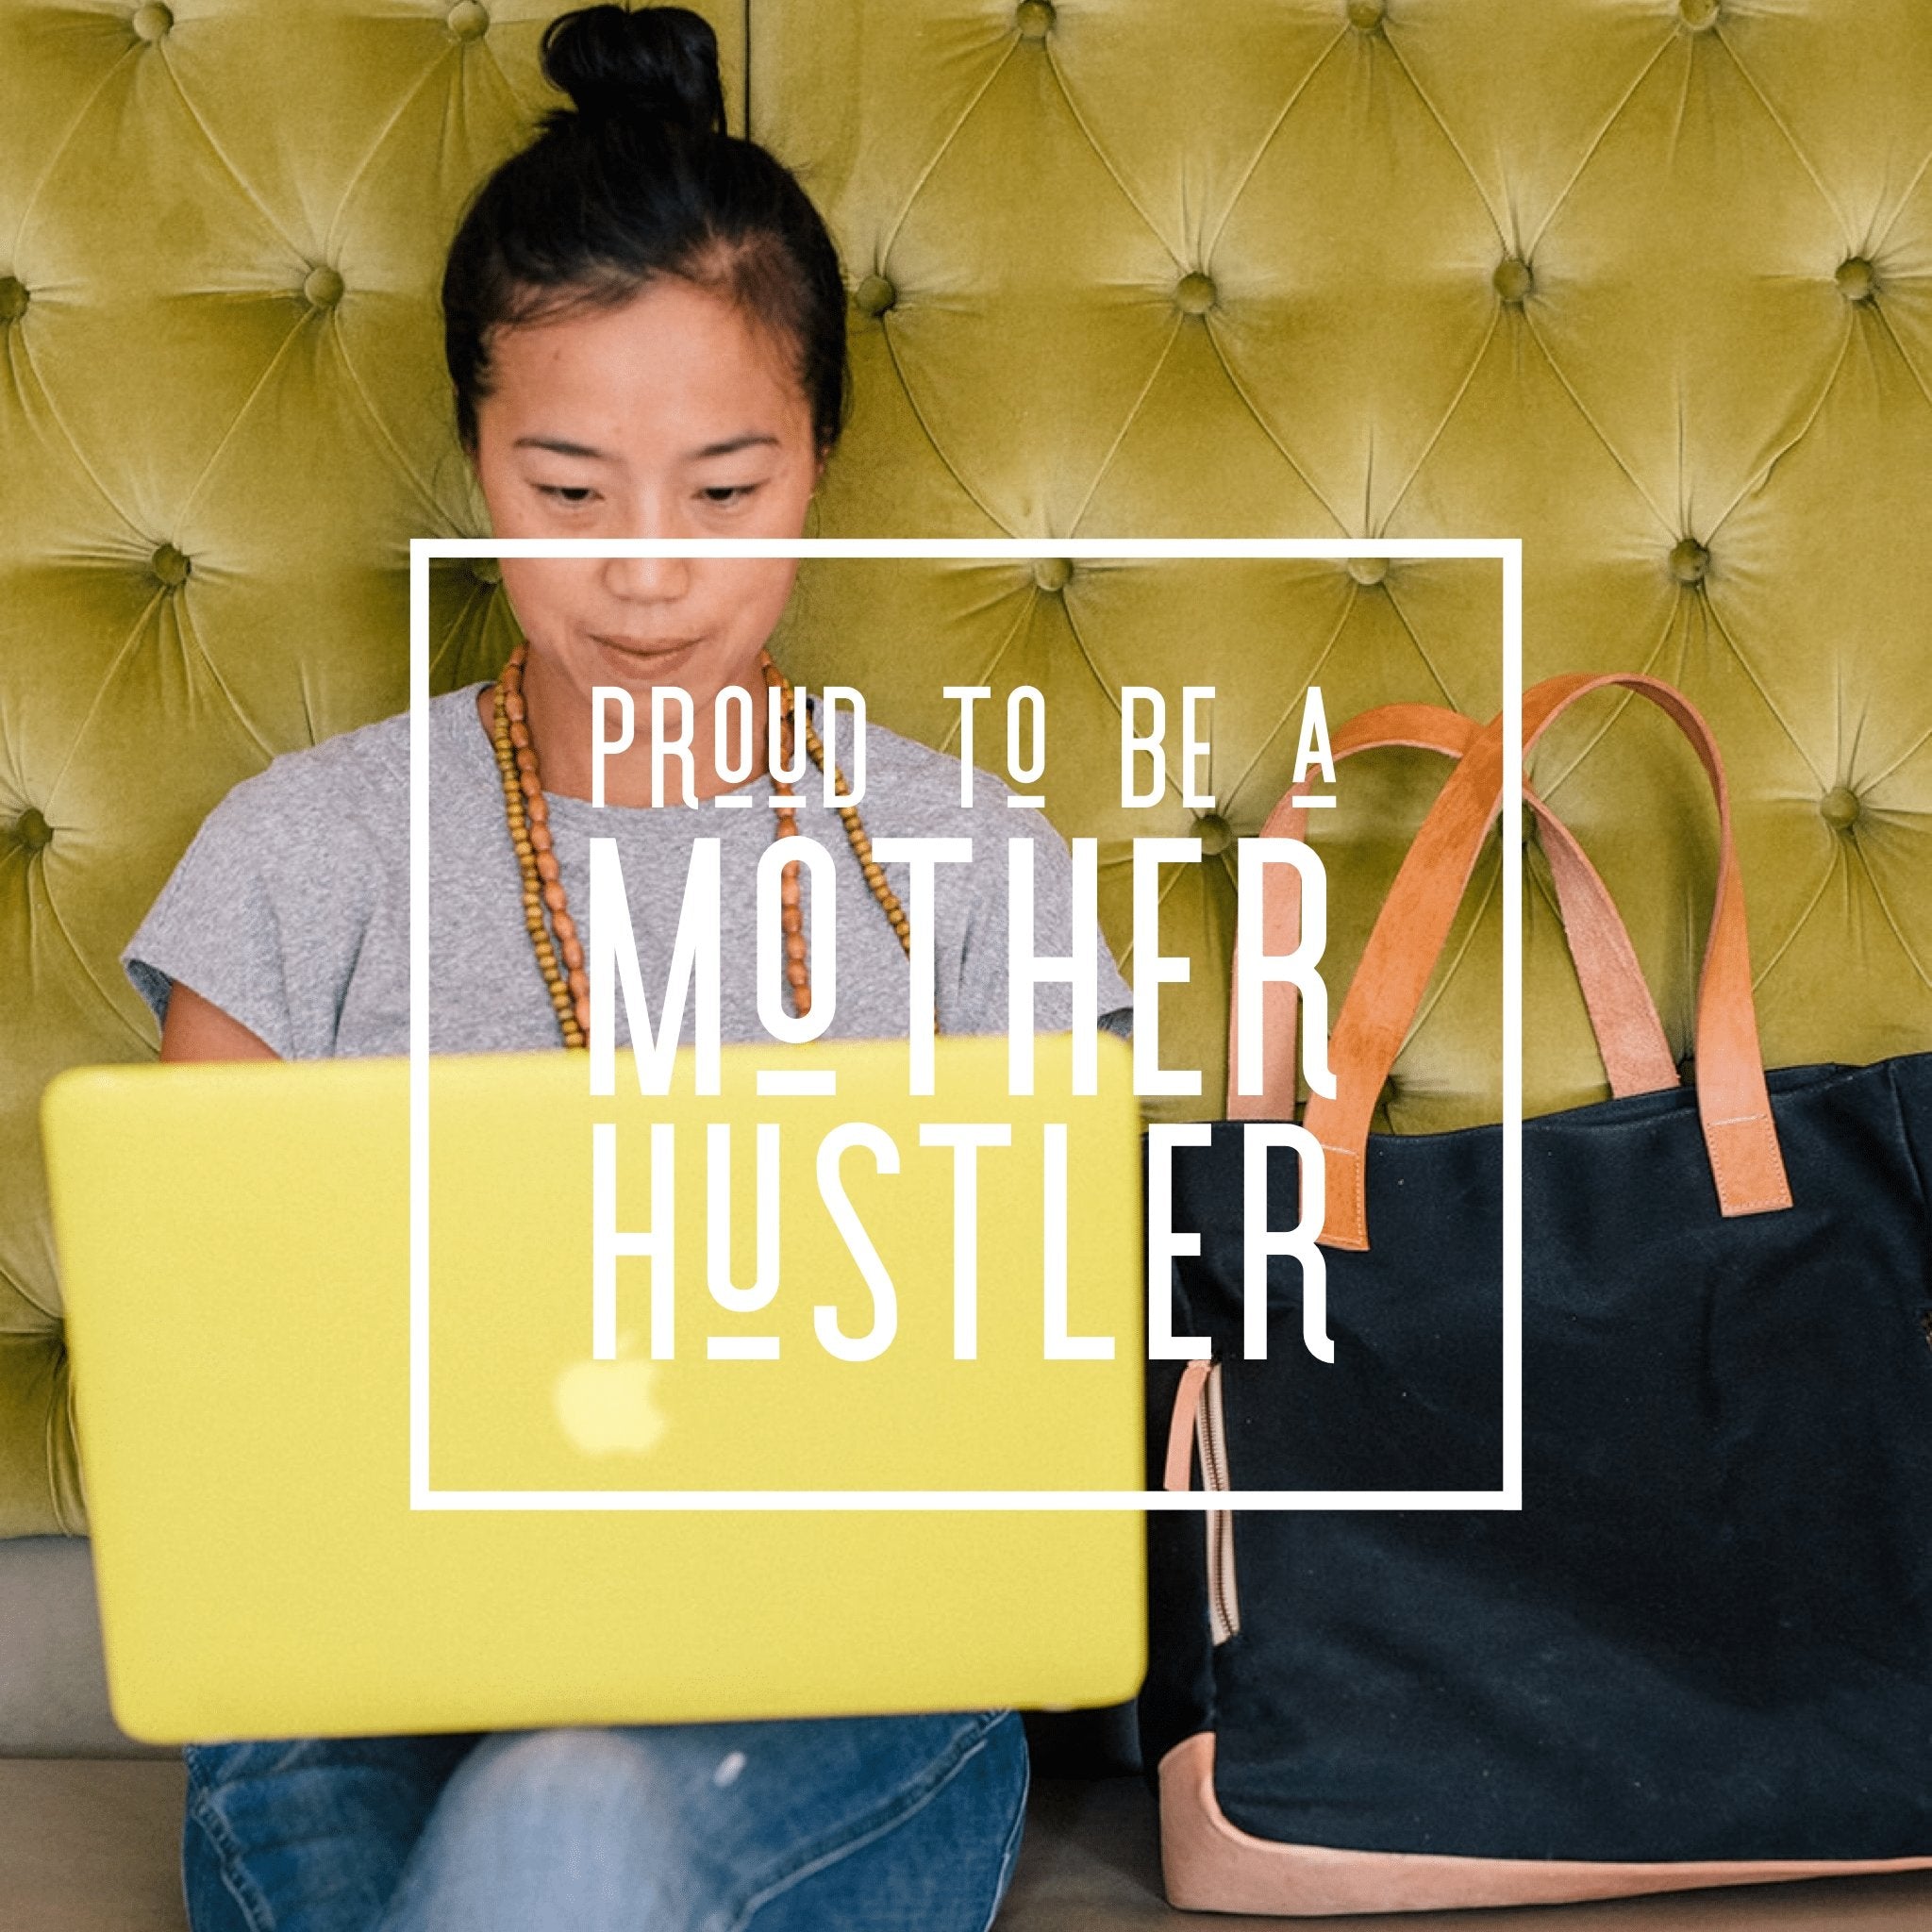 Proud to be a Mother Hustler - notebooks & honey